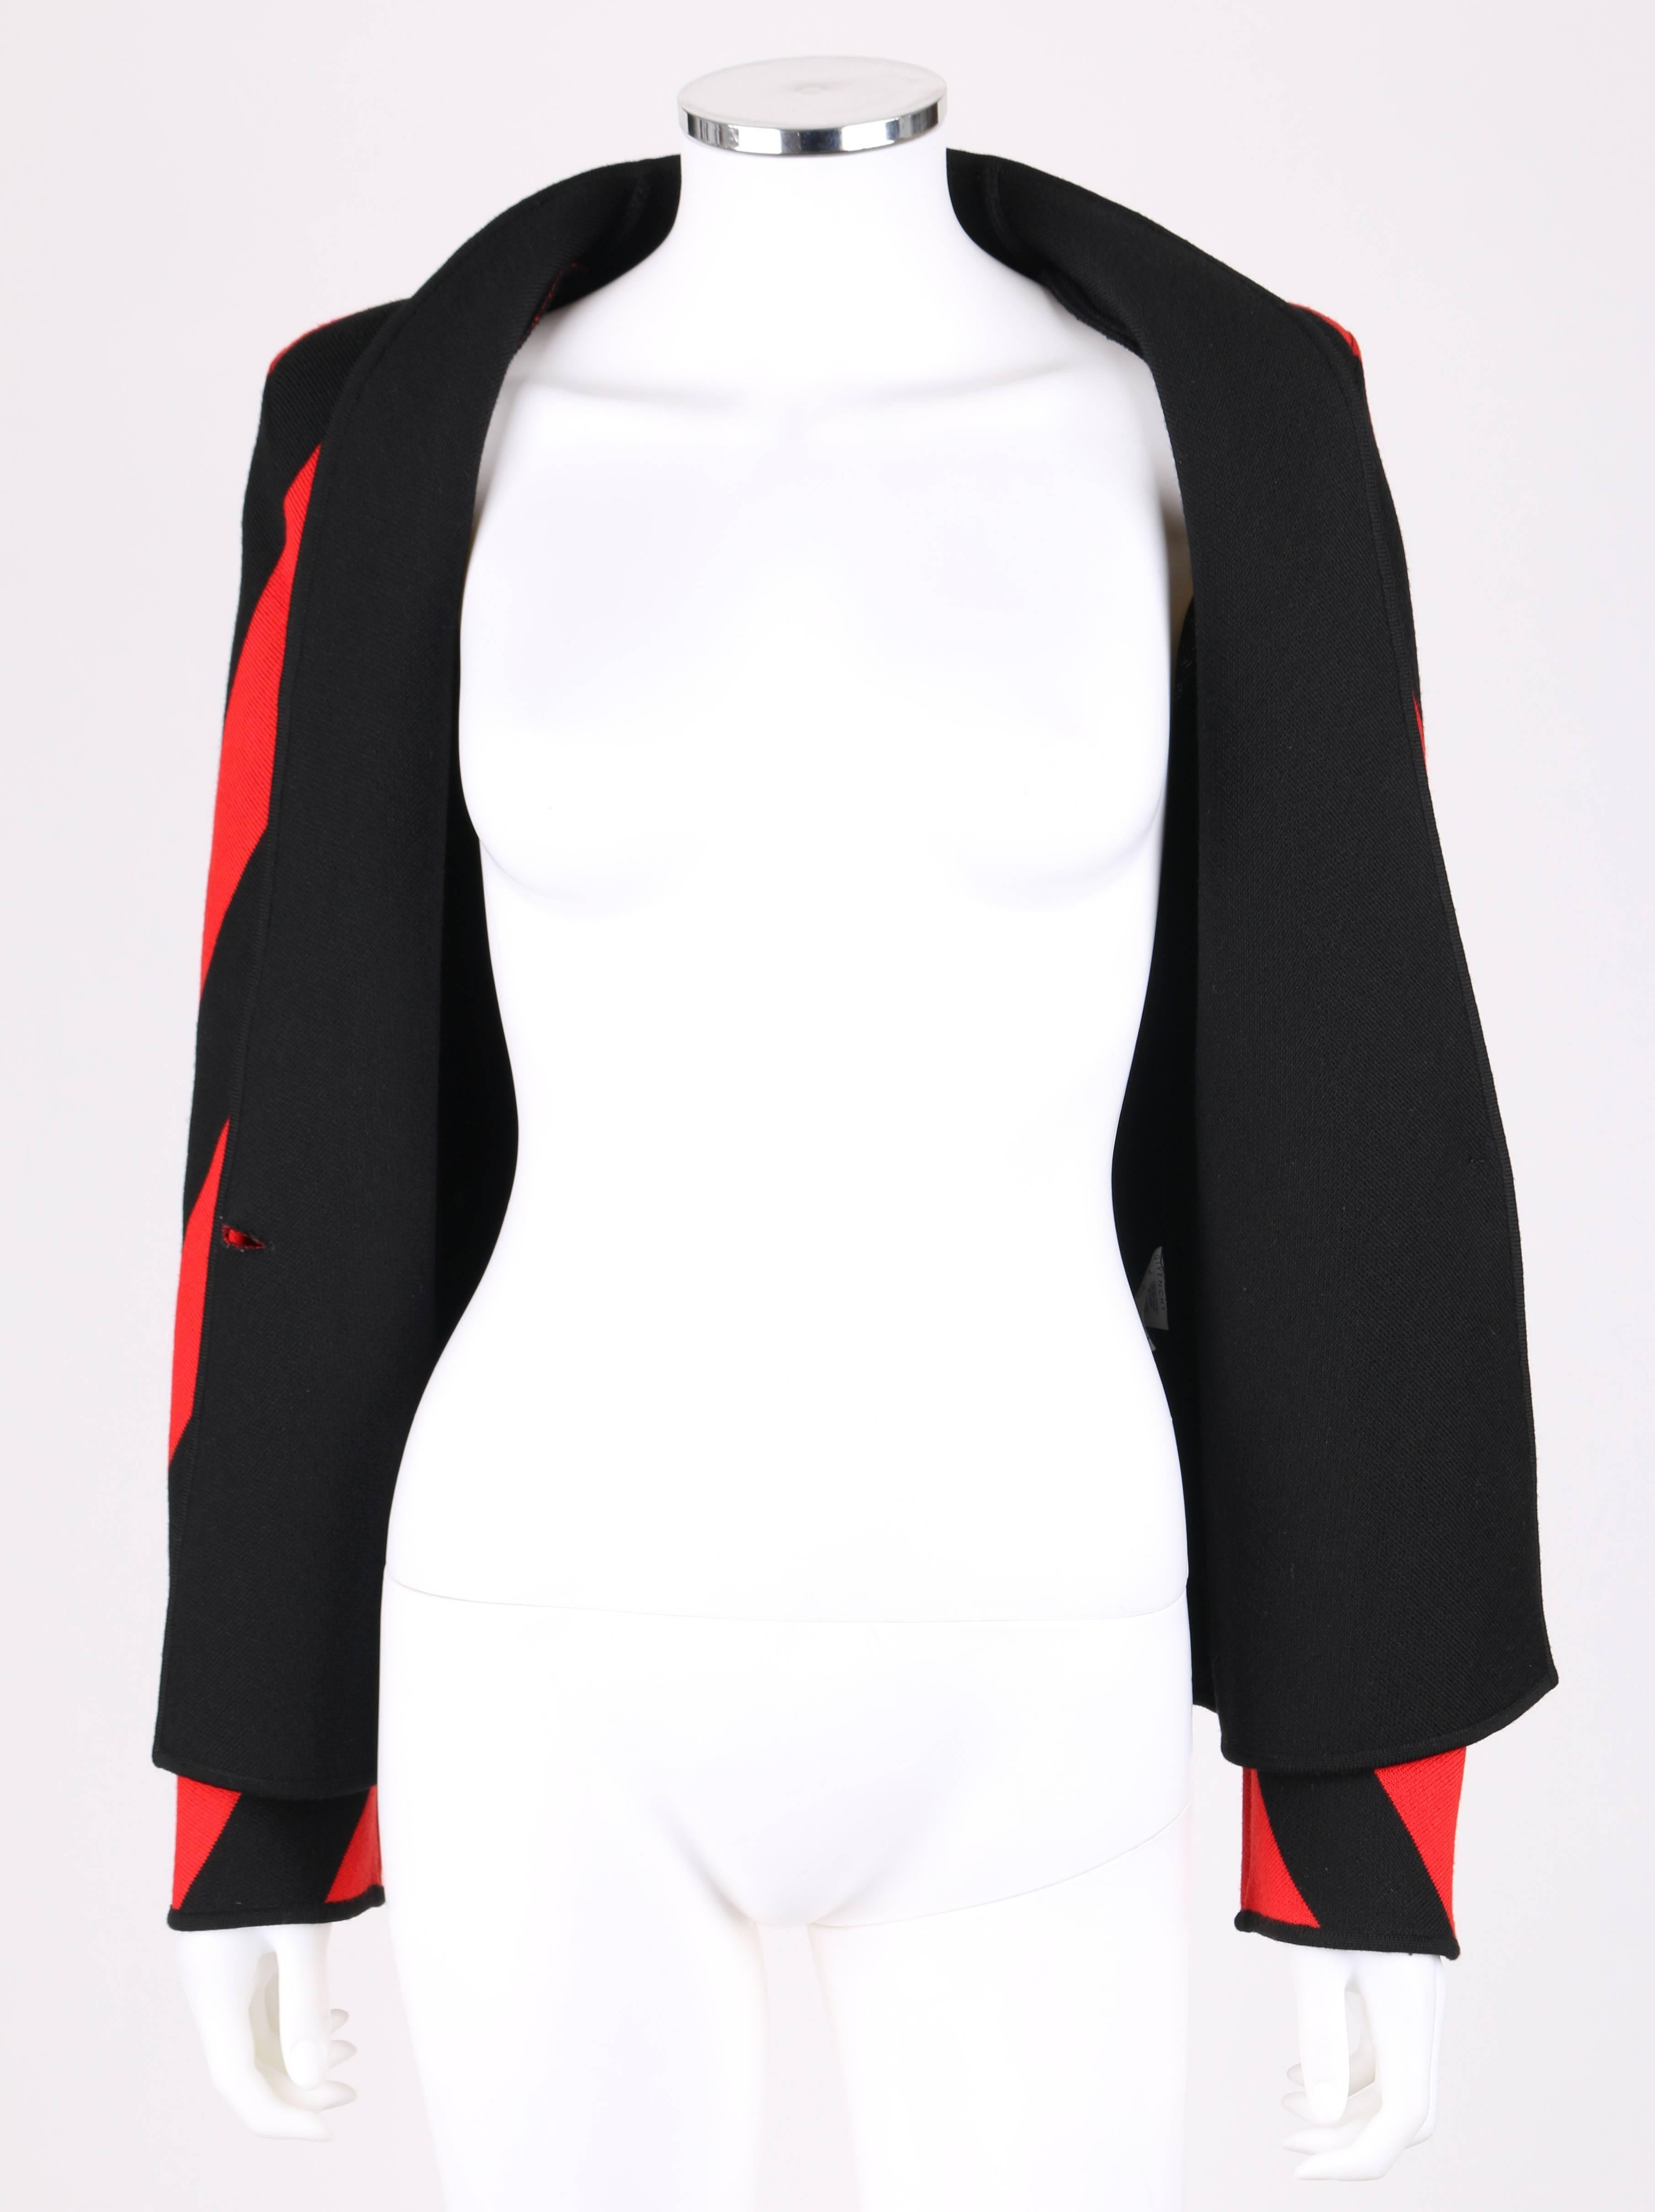 GIVENCHY COUTURE A/W 1998 ALEXANDER McQUEEN Black Red Stripe Wool Knit Blazer  For Sale 1